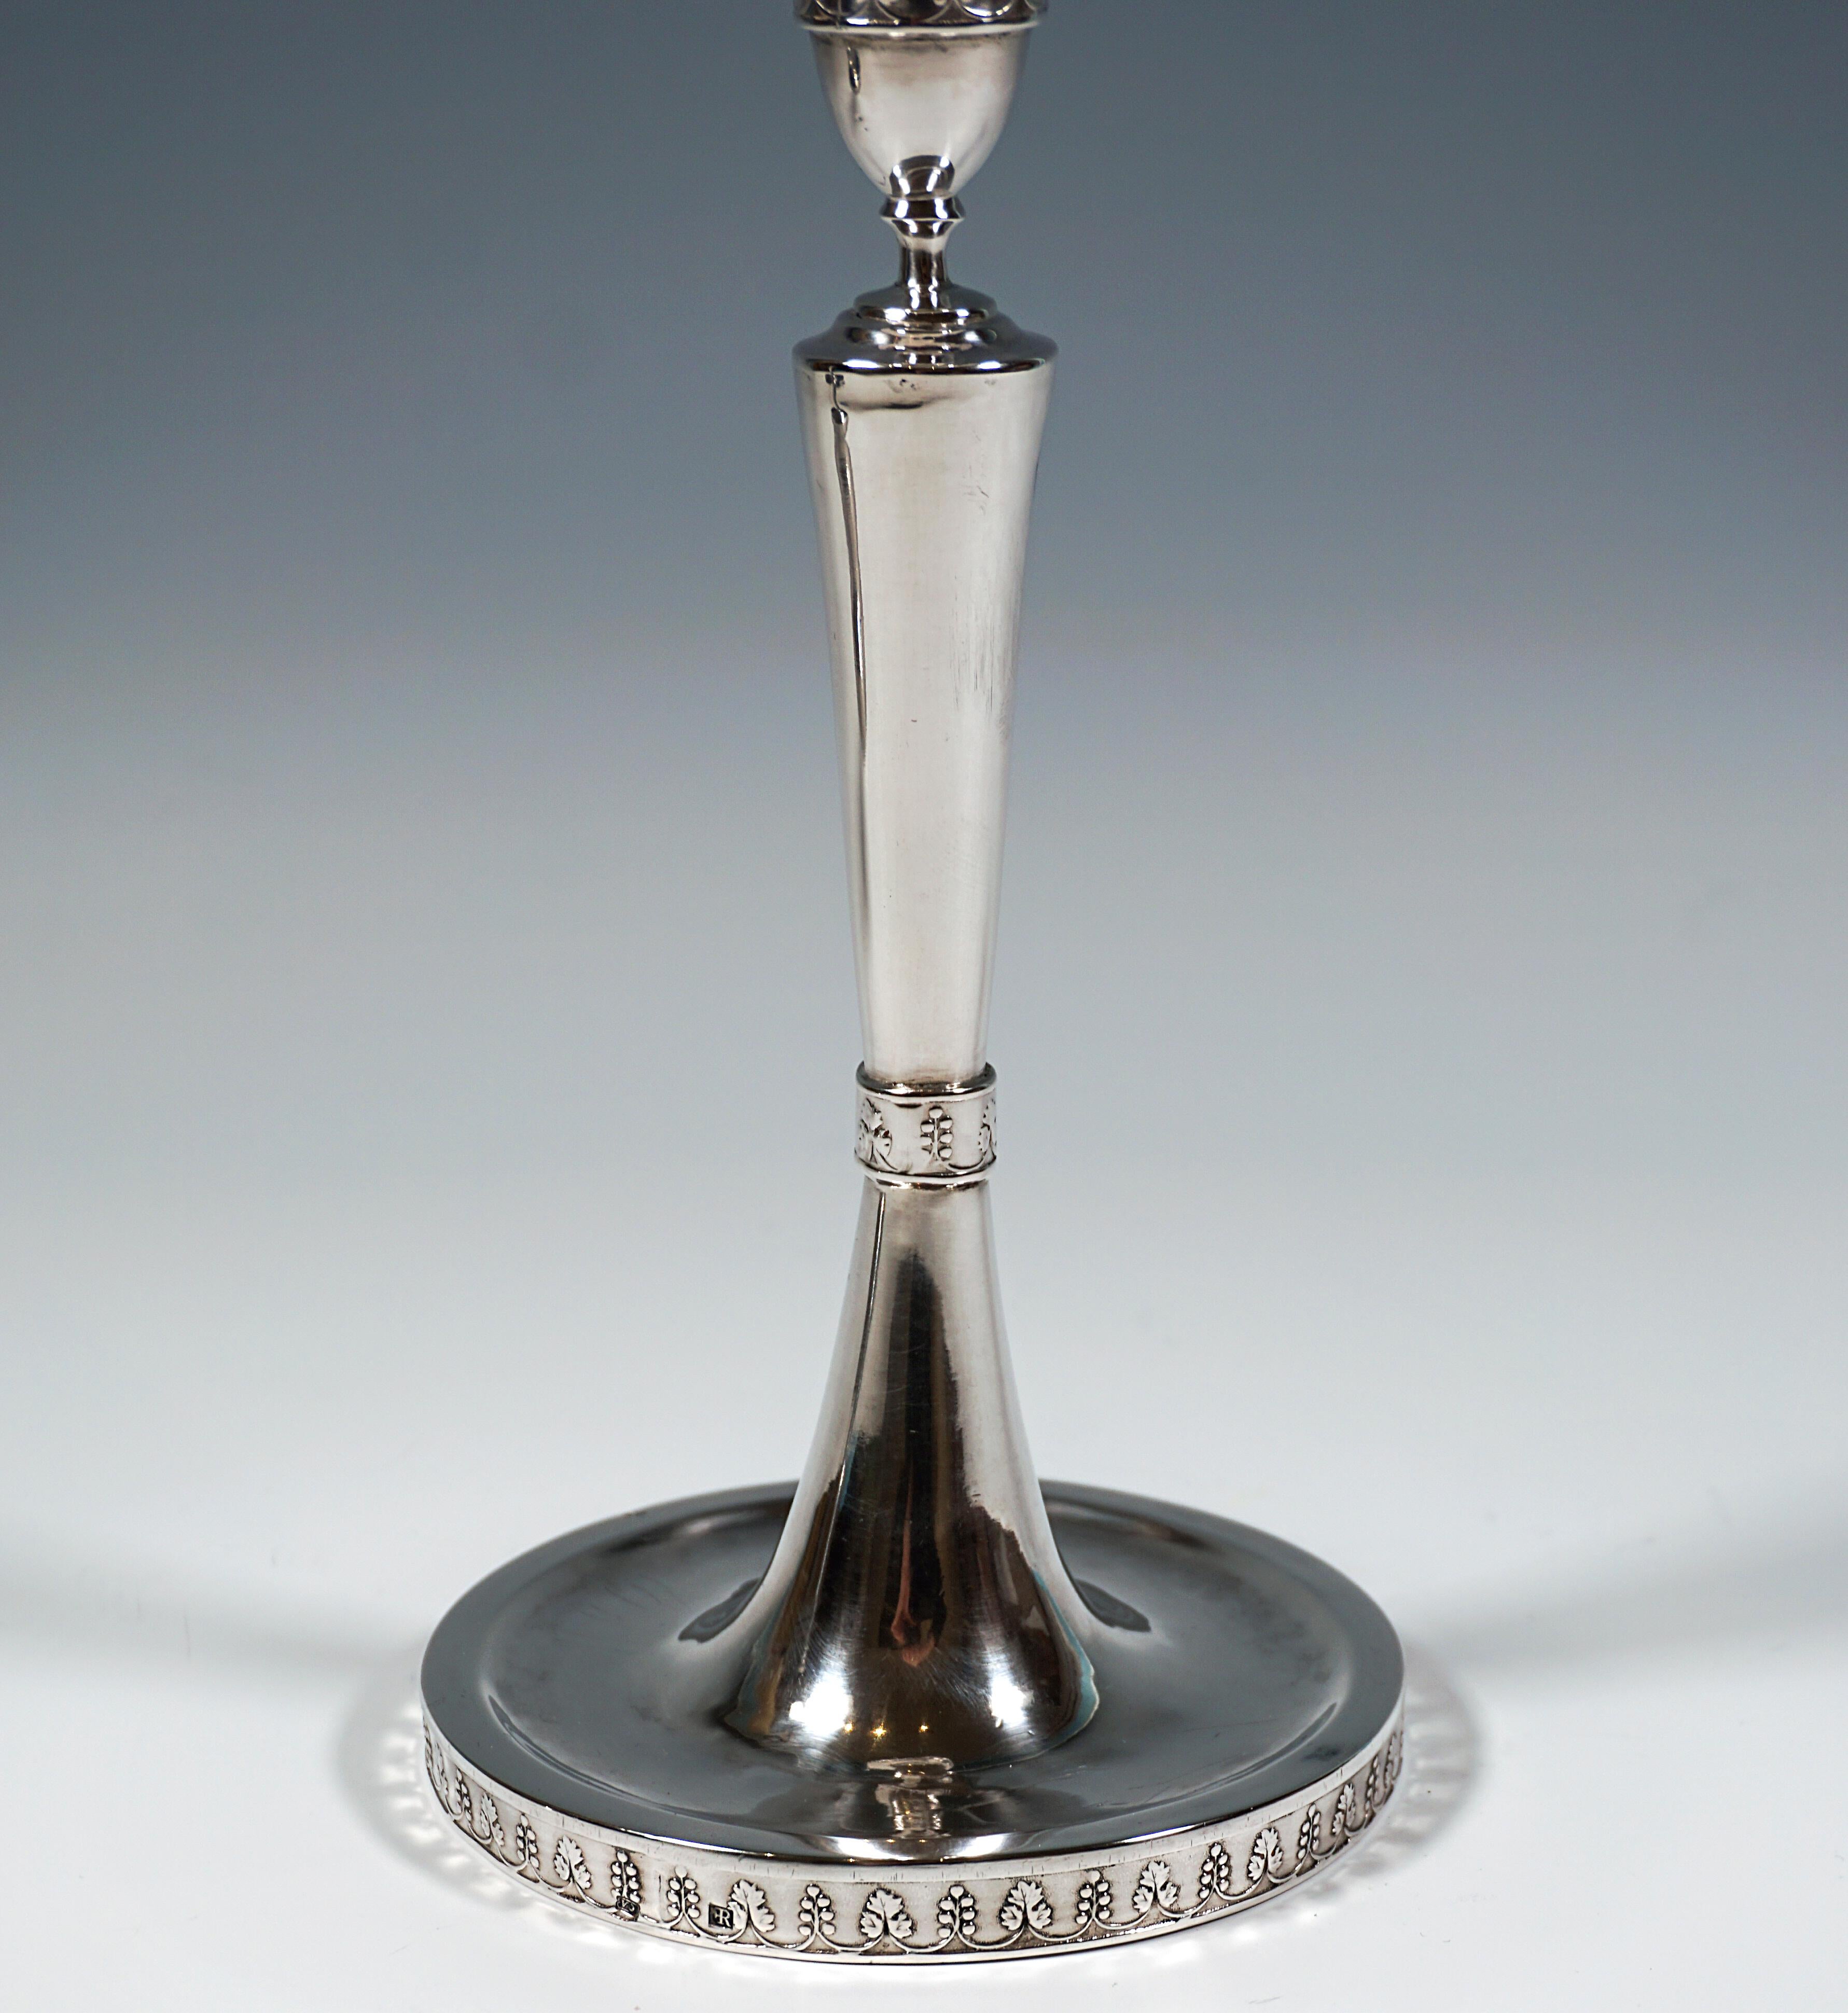 Early 19th Century Pair Of Antique Empire Silver Candle Holders, Johann Kaba Vienna, Dated 1803 For Sale